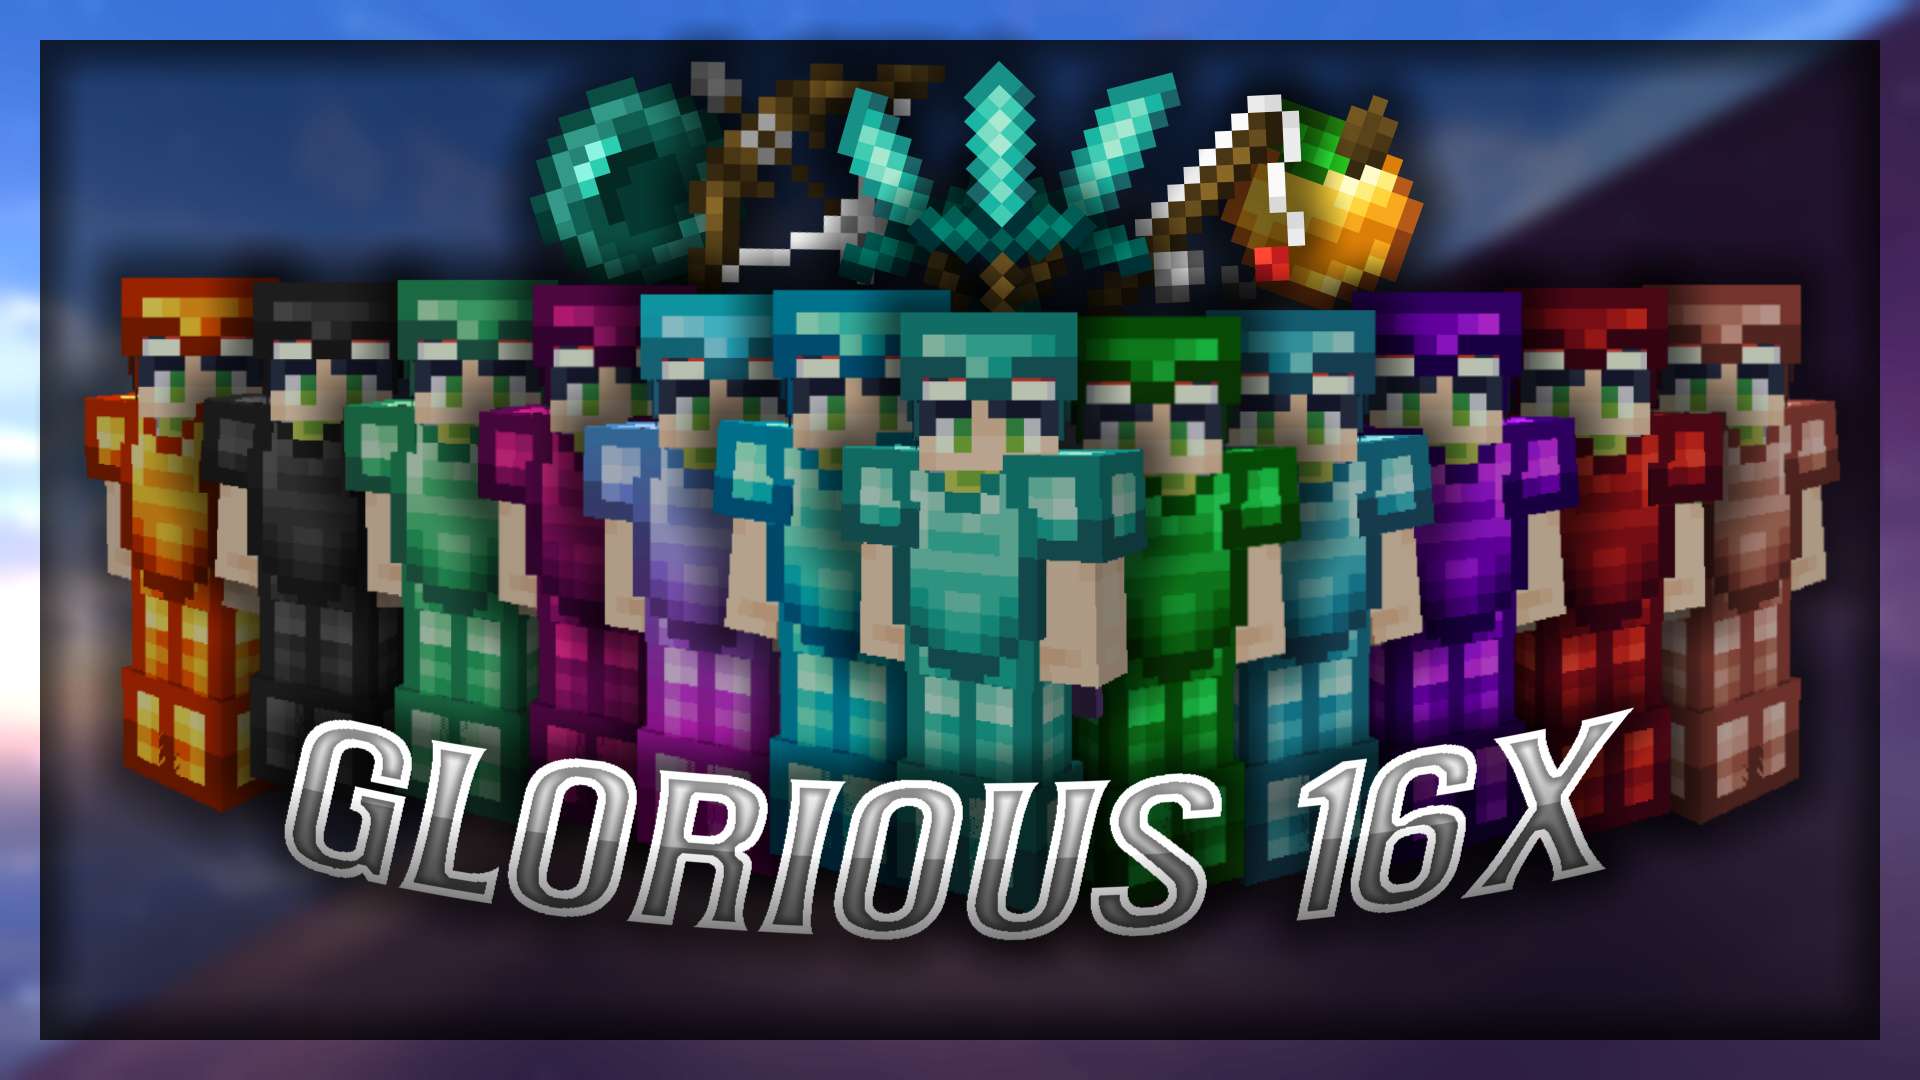 (open zip with WinRAR) Glorious - Autumn 16x by Mek on PvPRP